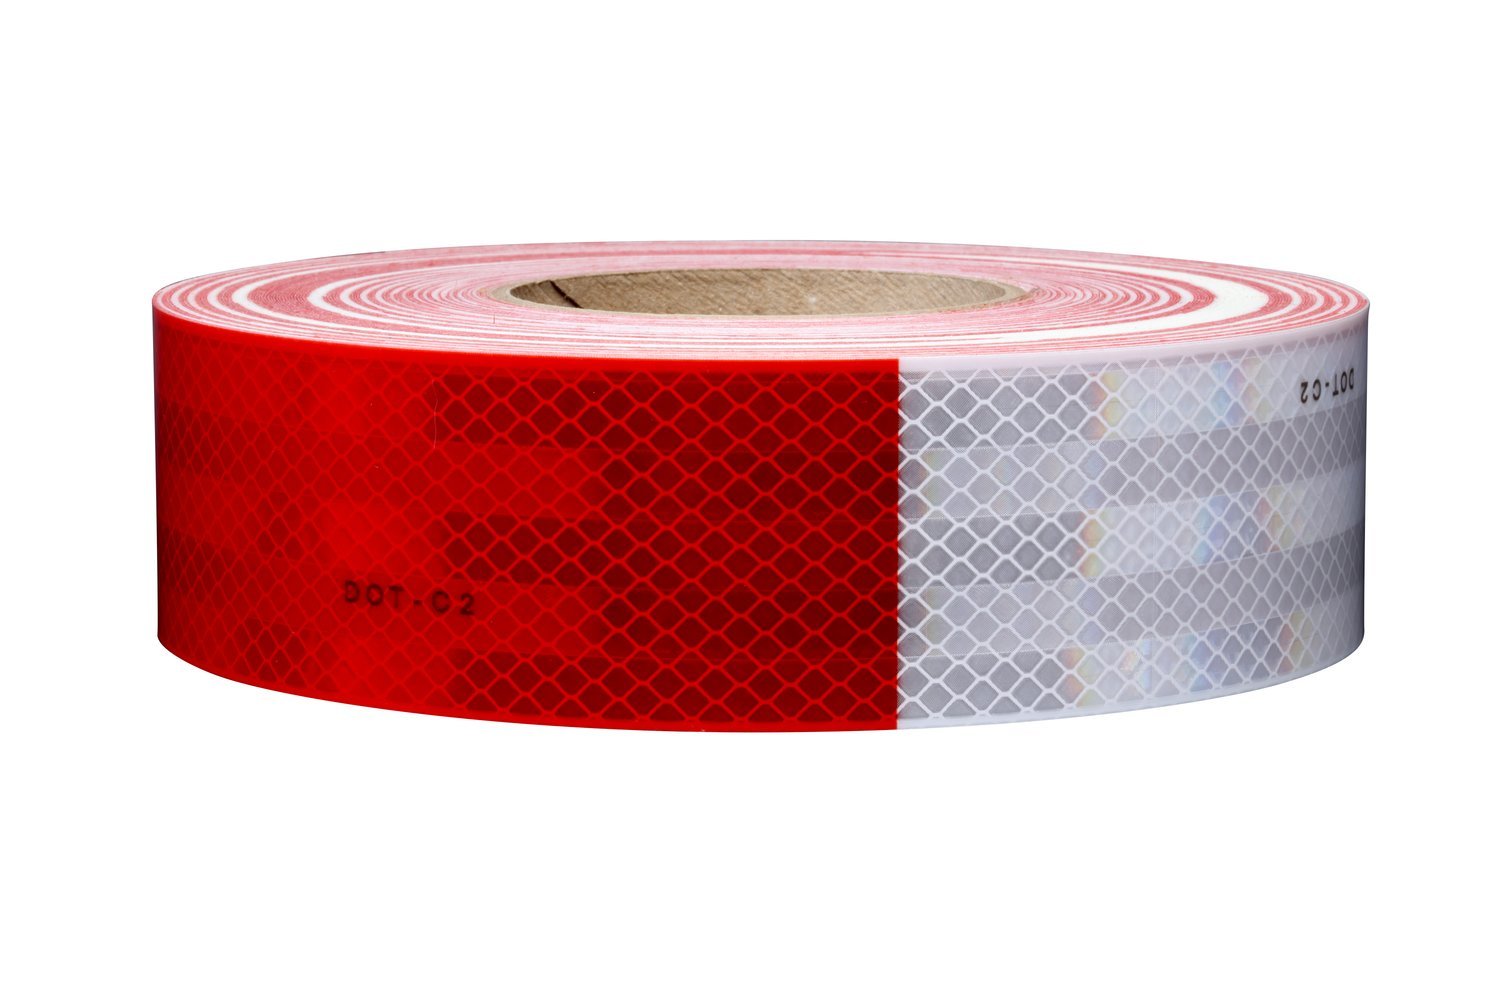 7010304534 - 3M Diamond Grade Conspicuity Markings 983-32, Red/White, DOT, 2 in x
50 yd, 10/Carton